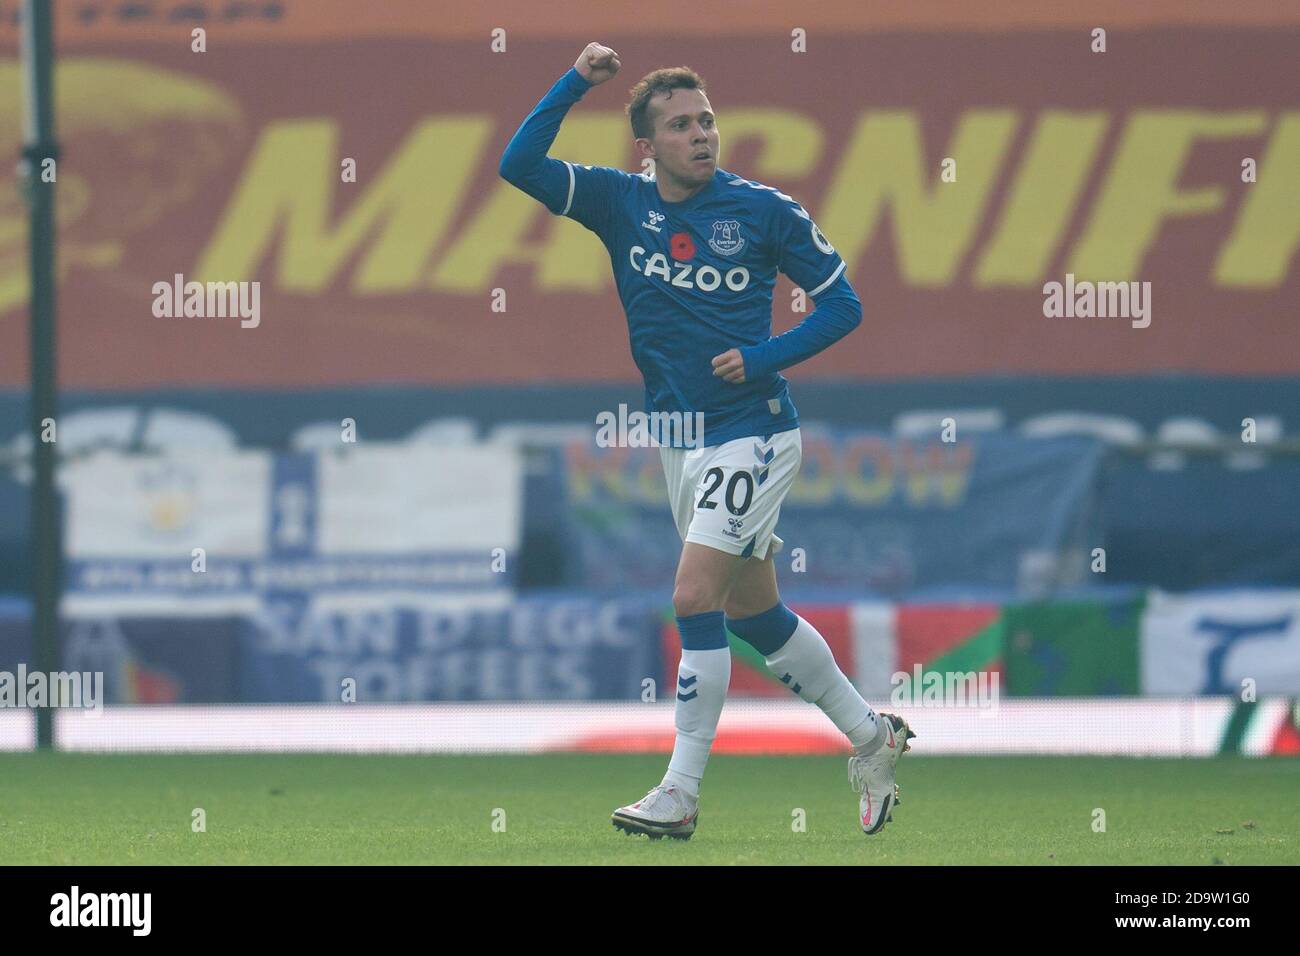 Liverpool. 8th Nov, 2020. Everton's Bernard celebrates after scoring during the Premier League match between Everton and Manchester United at Goodison Park Stadium in Liverpool, Britain, on Nov. 7, 2020. Manchester United won 3-1. Credit: Xinhua/Alamy Live News Stock Photo